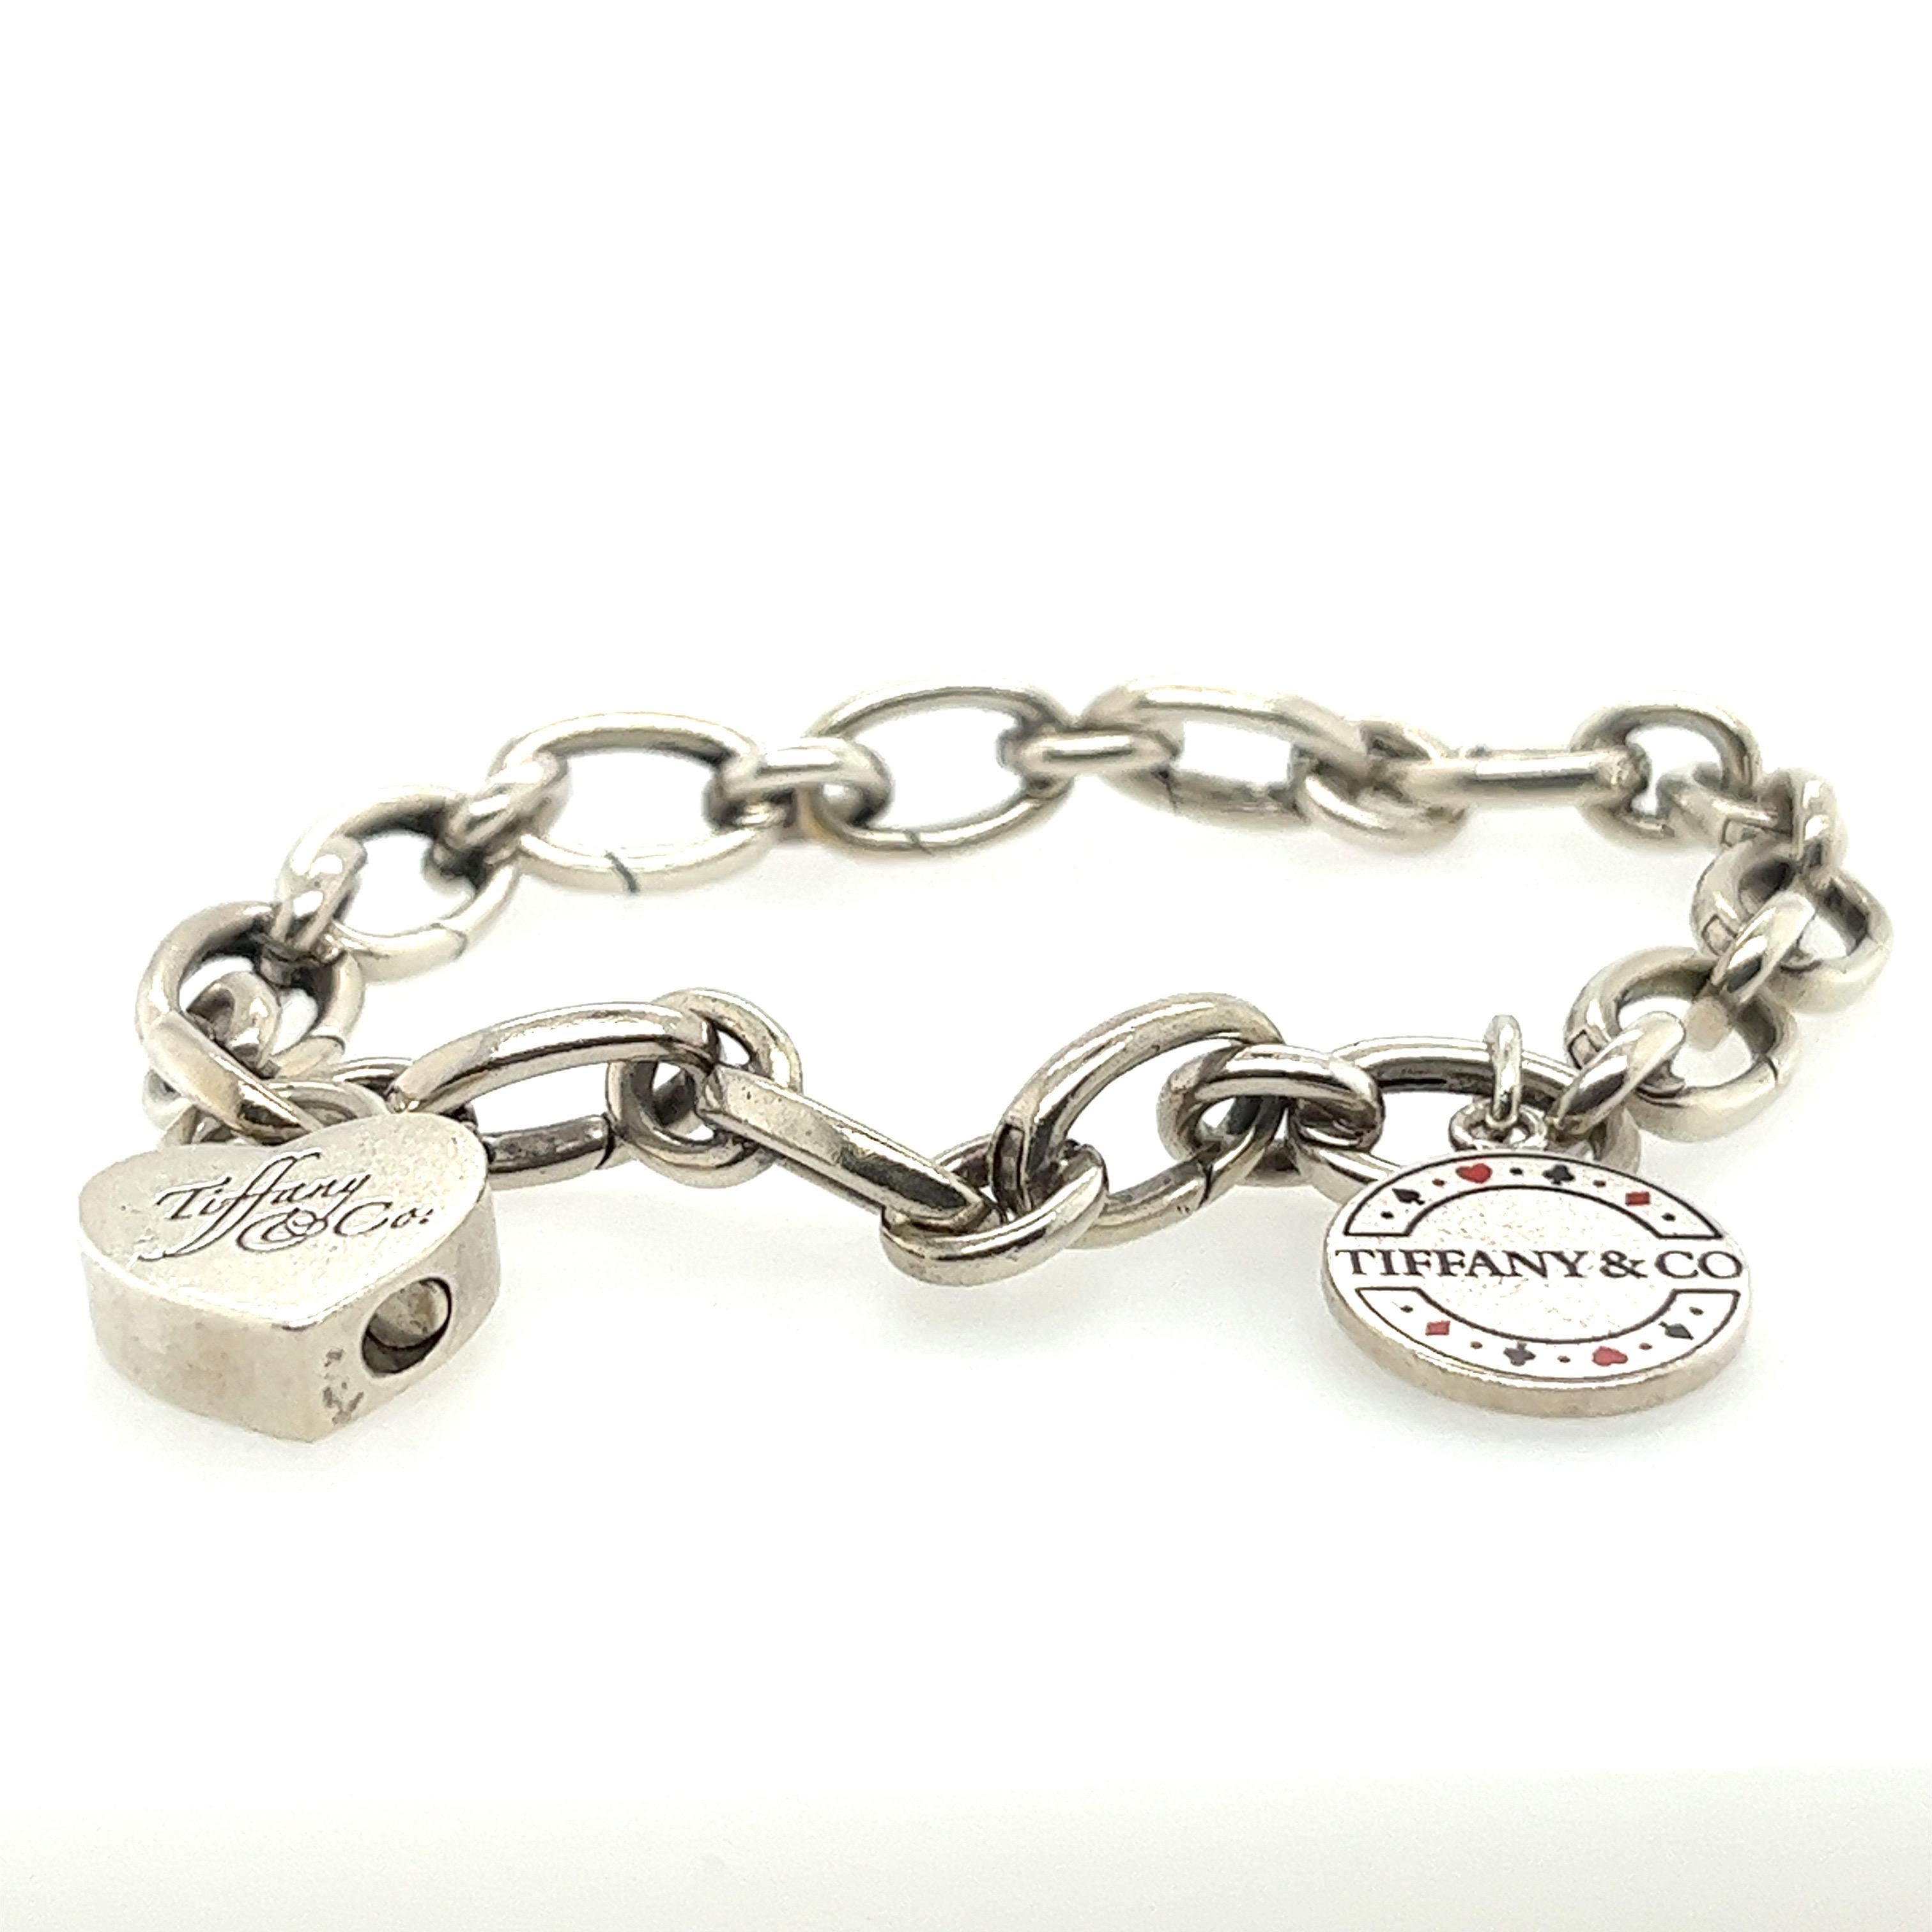 Tiffany & Co charm bracelet with 2 charms. Rare Las Vegas sterling silver & enamel poker chip charm was released as a limited edition. Second charm is a sterling silver heart shaped lock with Tiffany & Co written in cursive.